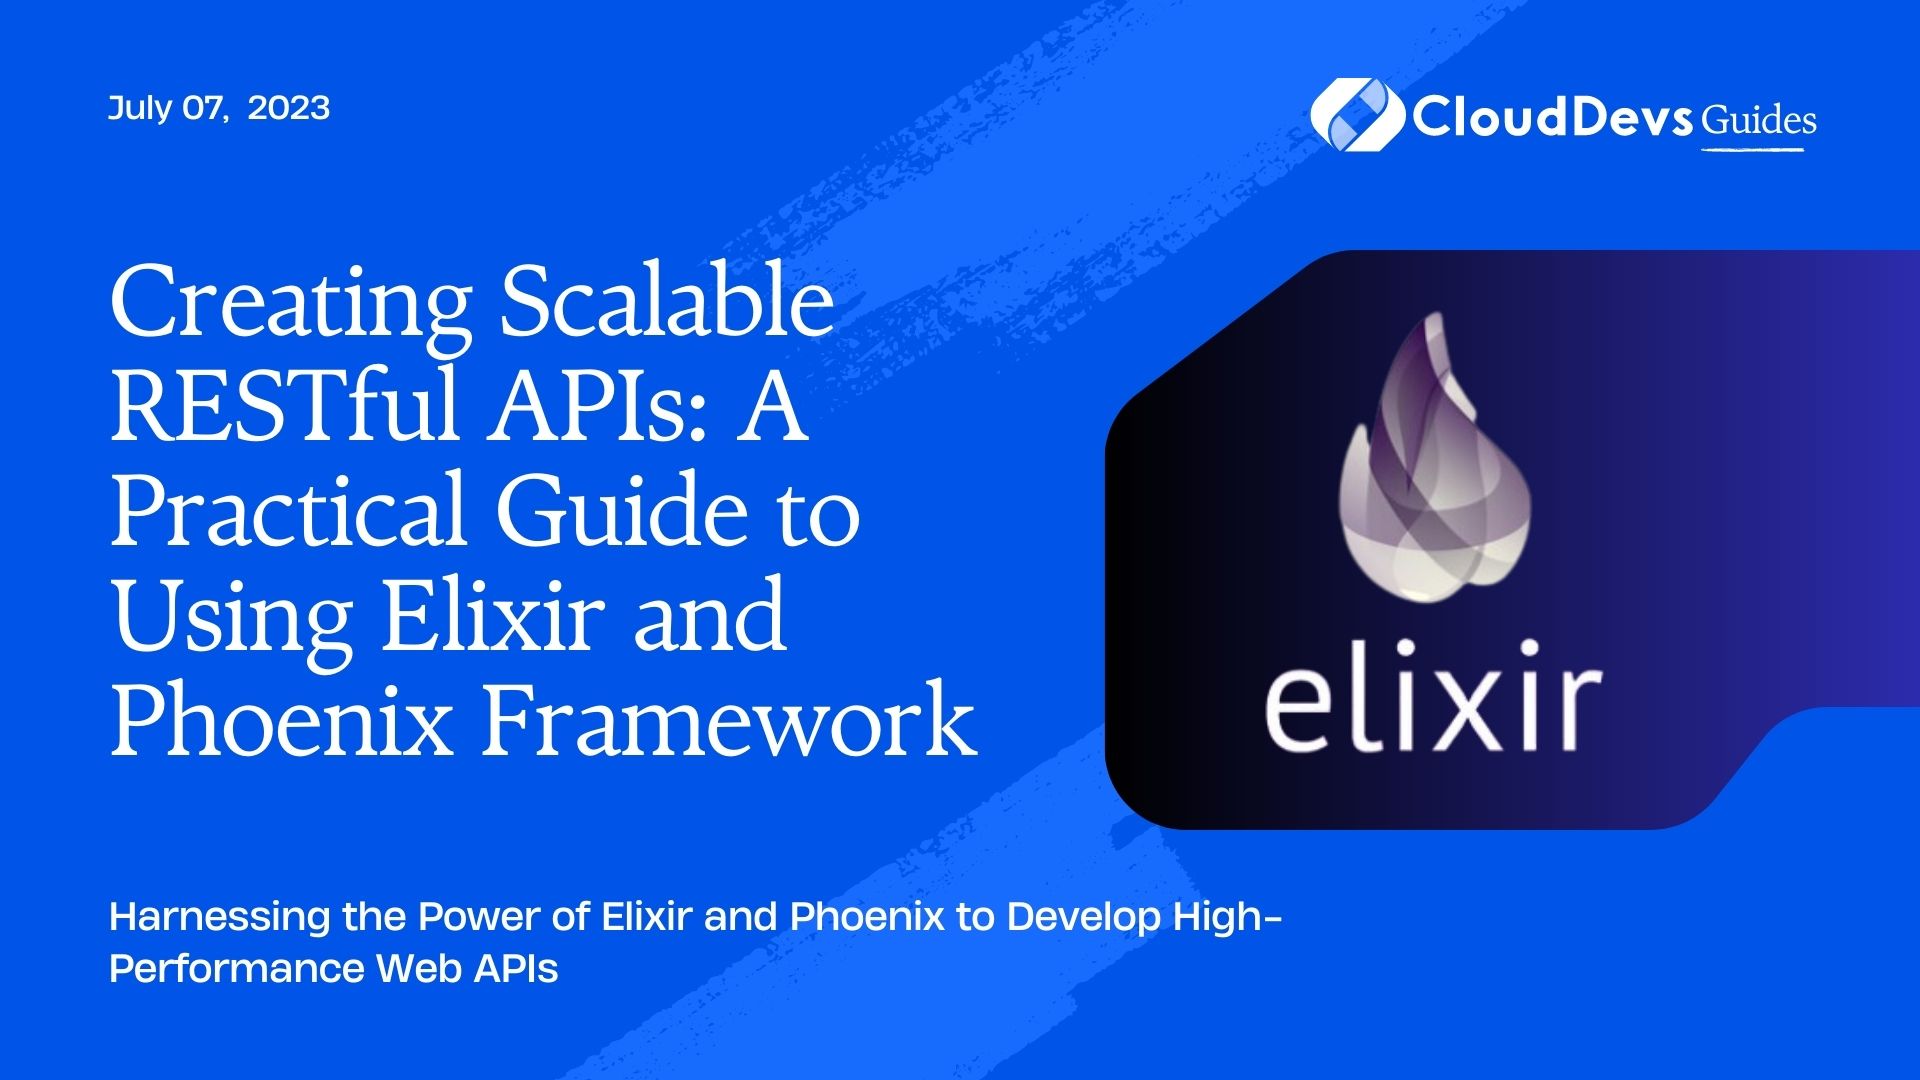 Creating Scalable RESTful APIs: A Practical Guide to Using Elixir and Phoenix Framework